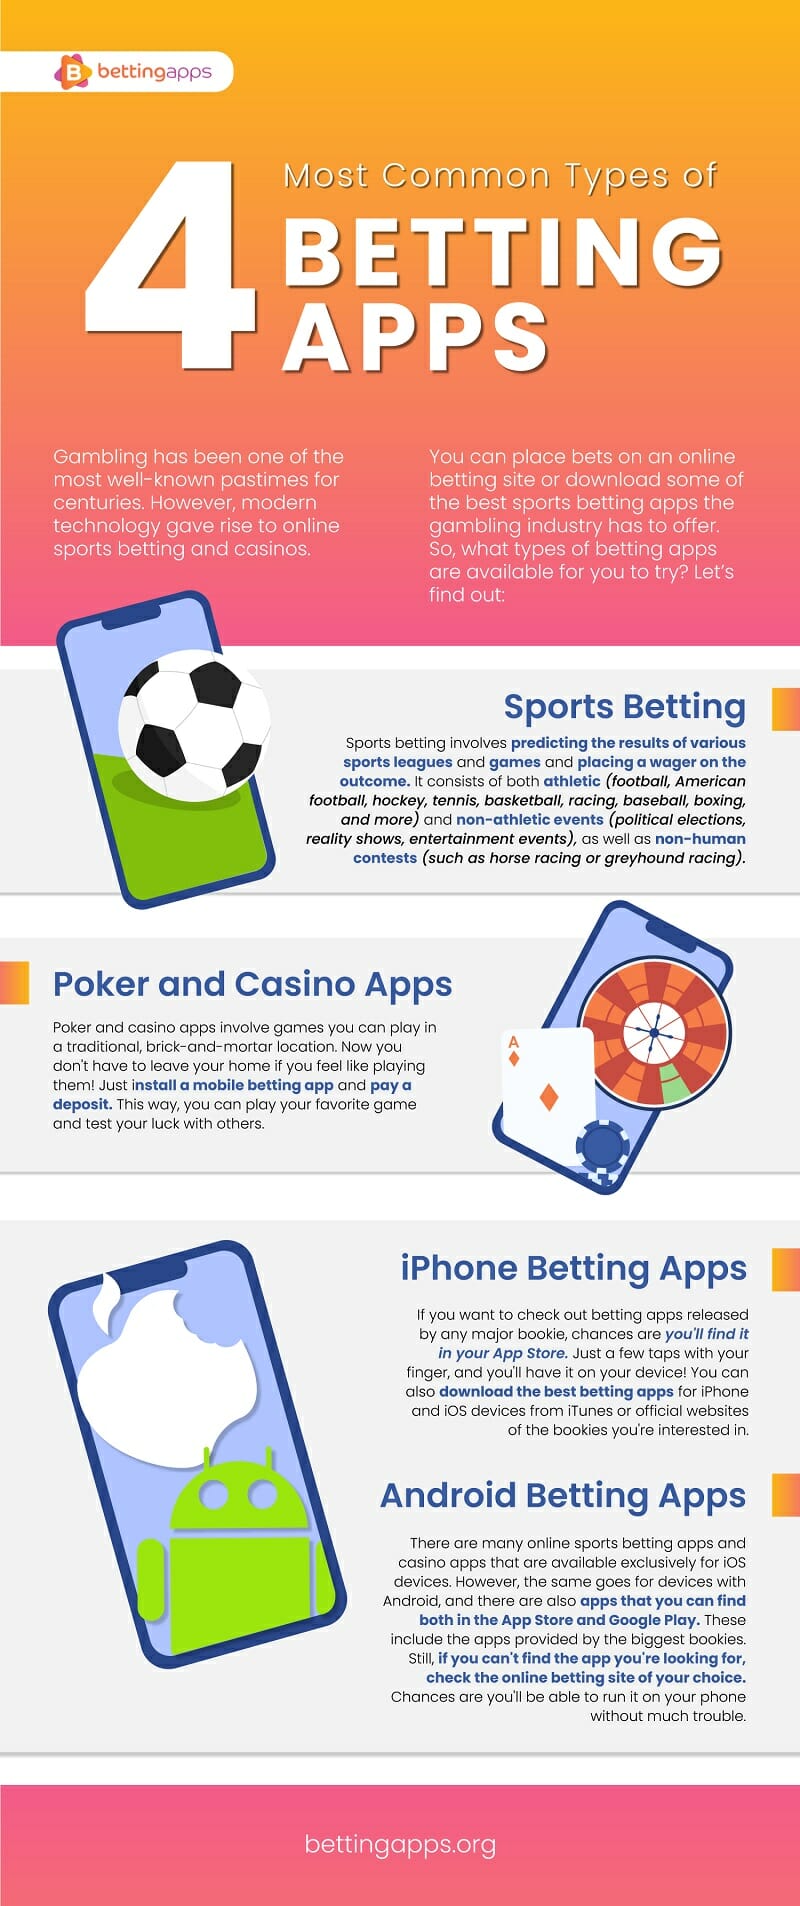 Most common types of betting apps